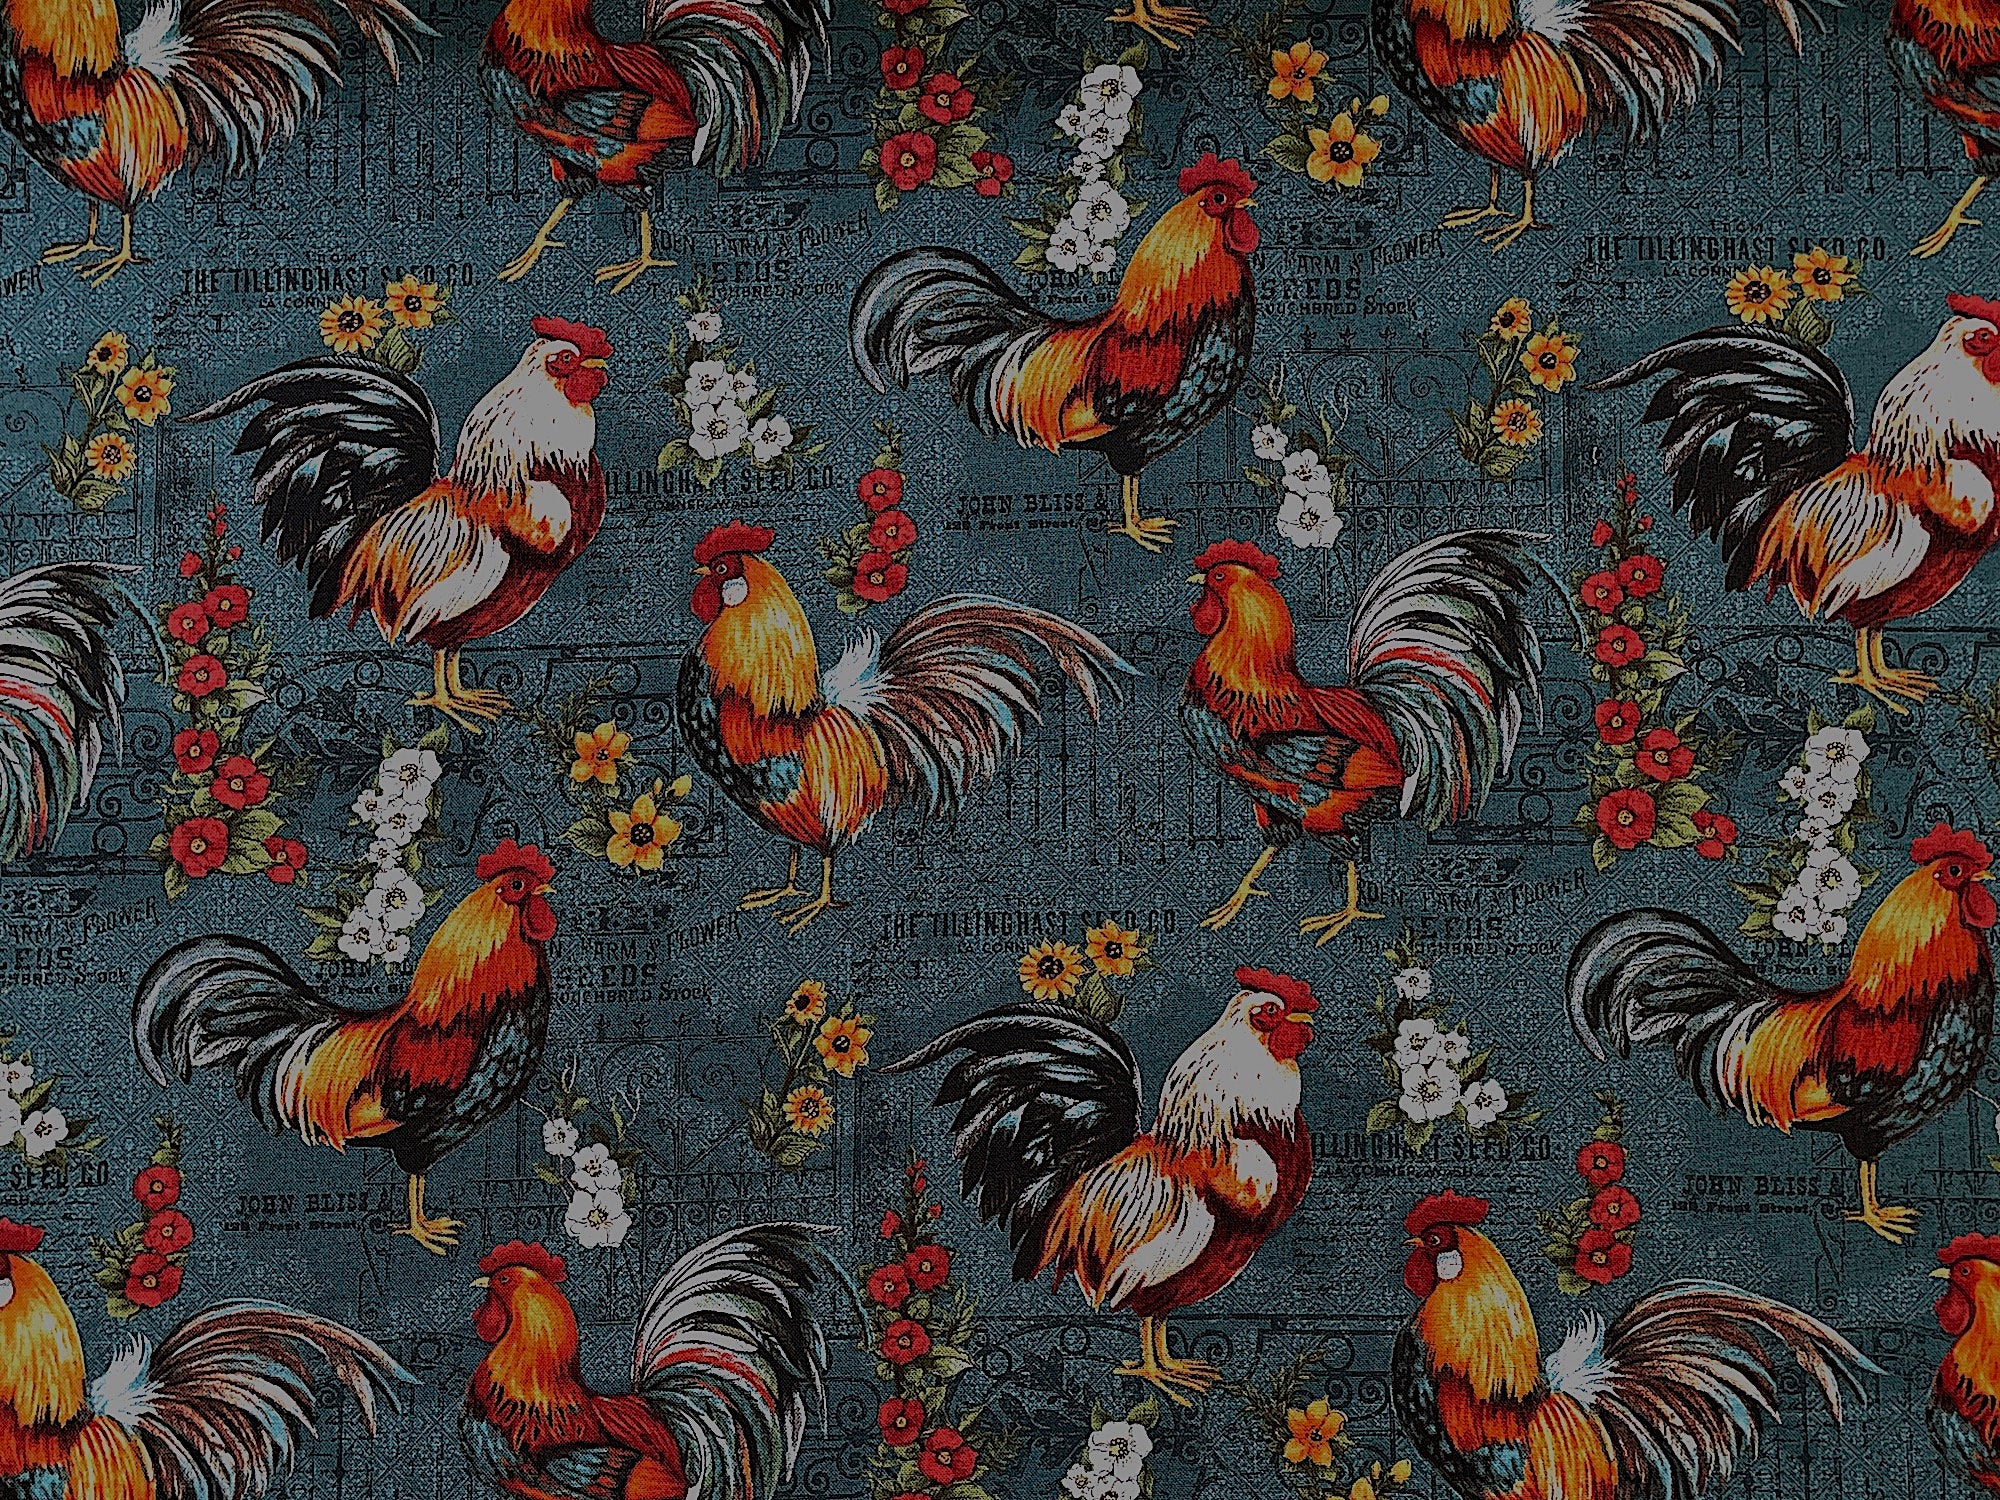 This fabric is part of the Garden Gate collection. This dark fabric is covered with roosters and flowers.